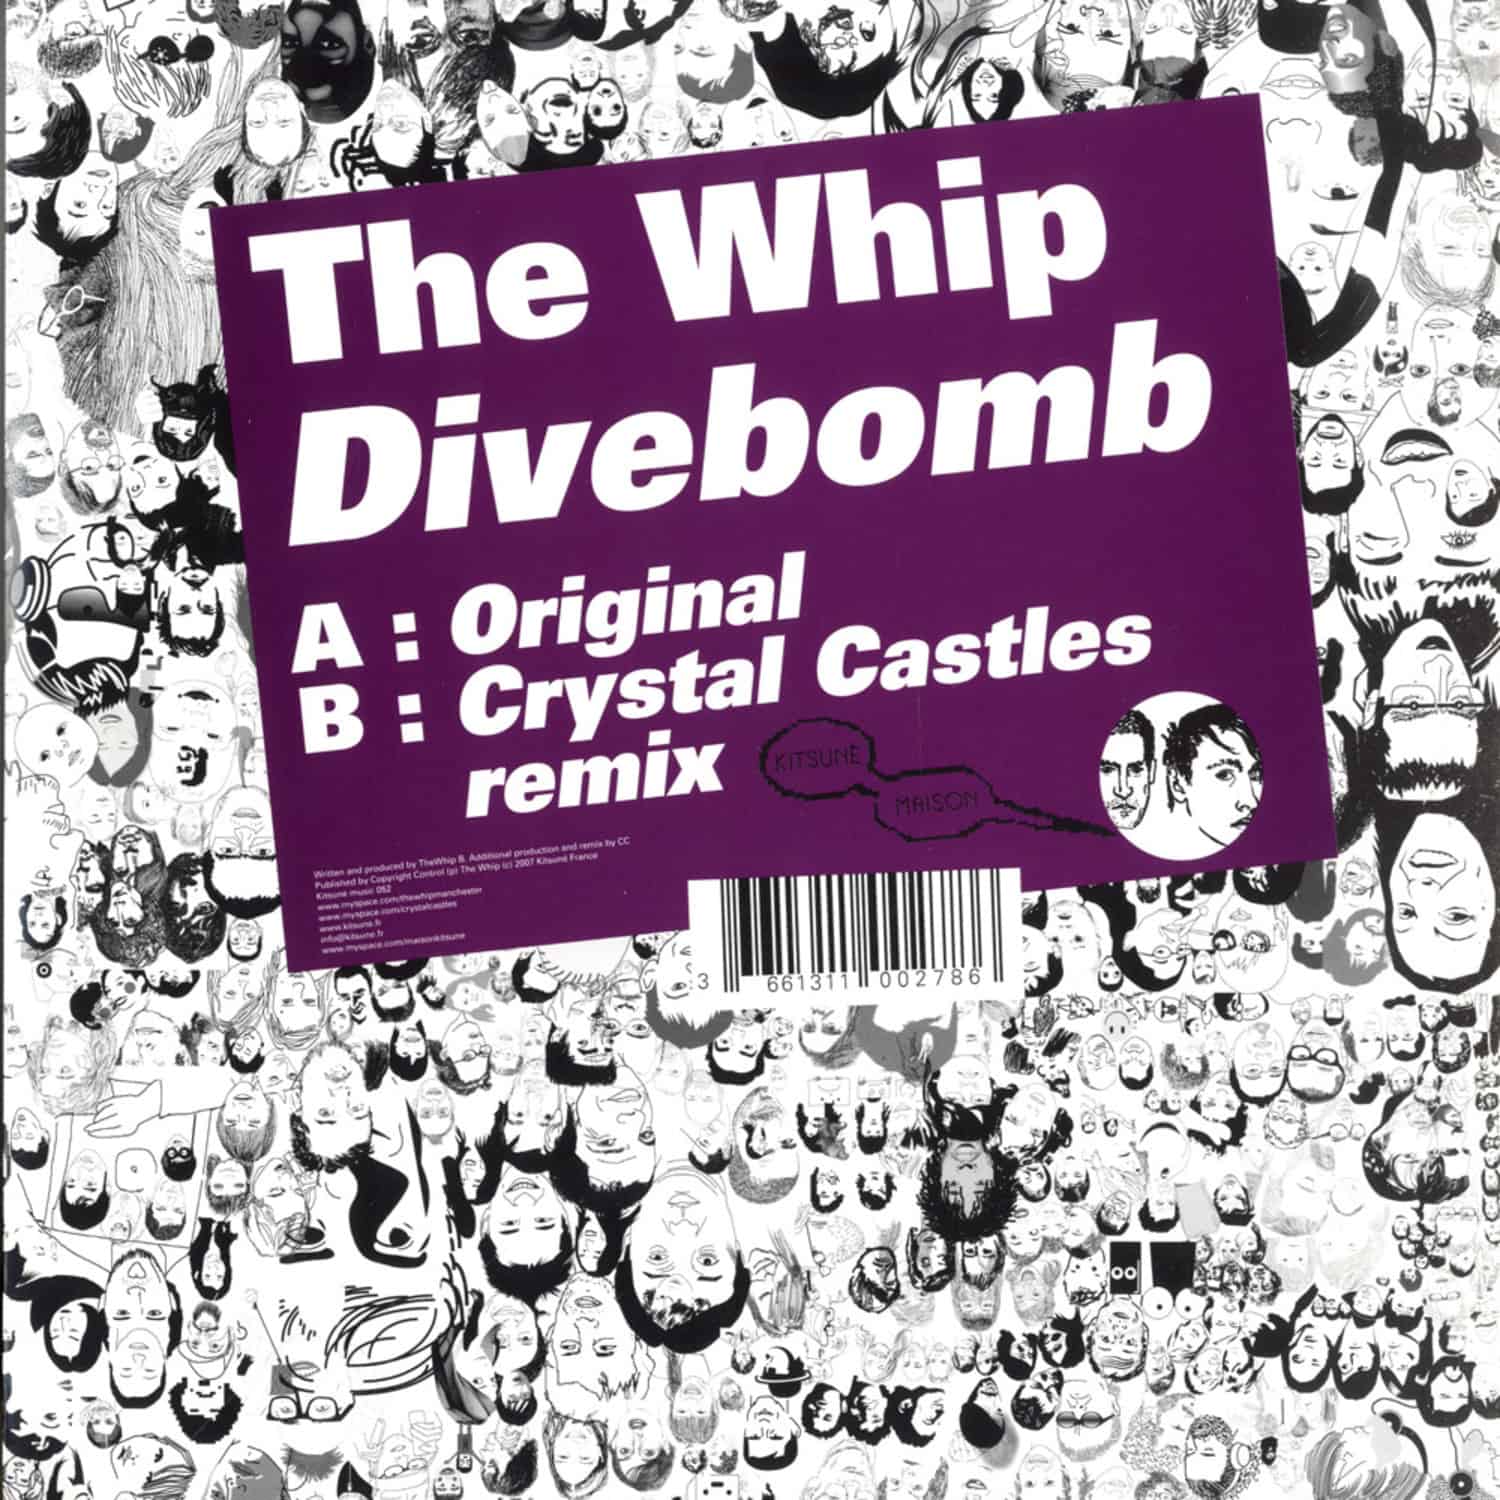 The Whip - DIVEBOMB